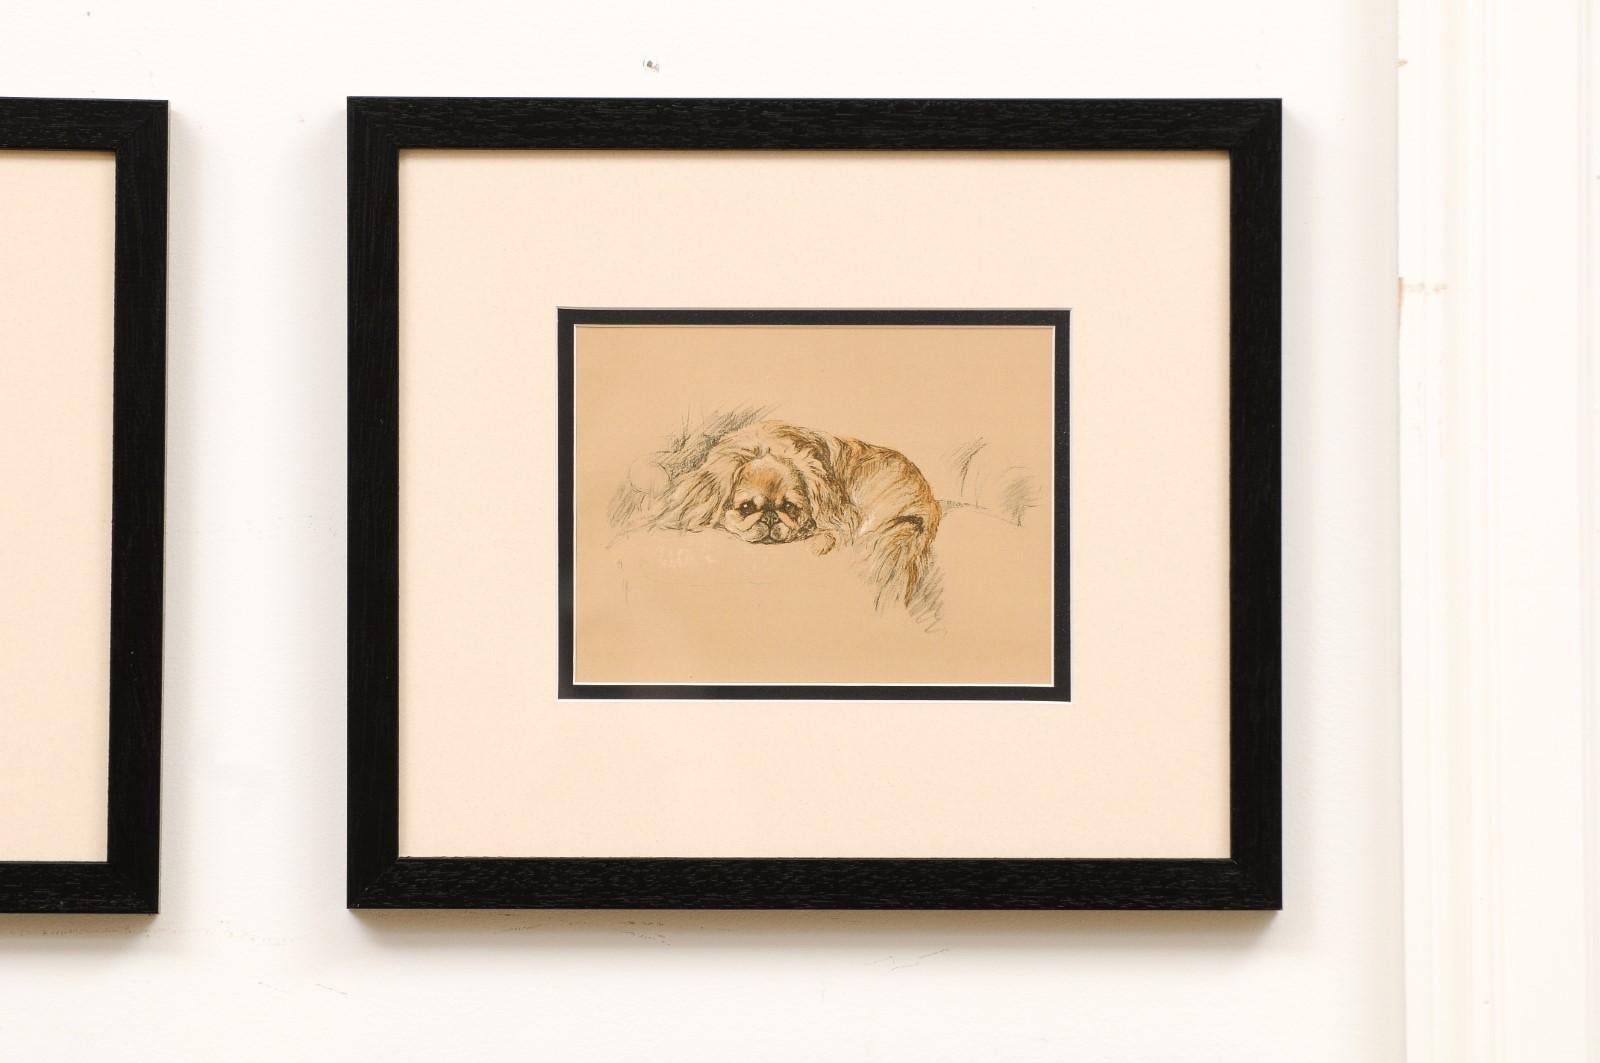 Set of 8 English Lucy Dawson Prints Depicting Dogs in Black Frames under Glass. 3